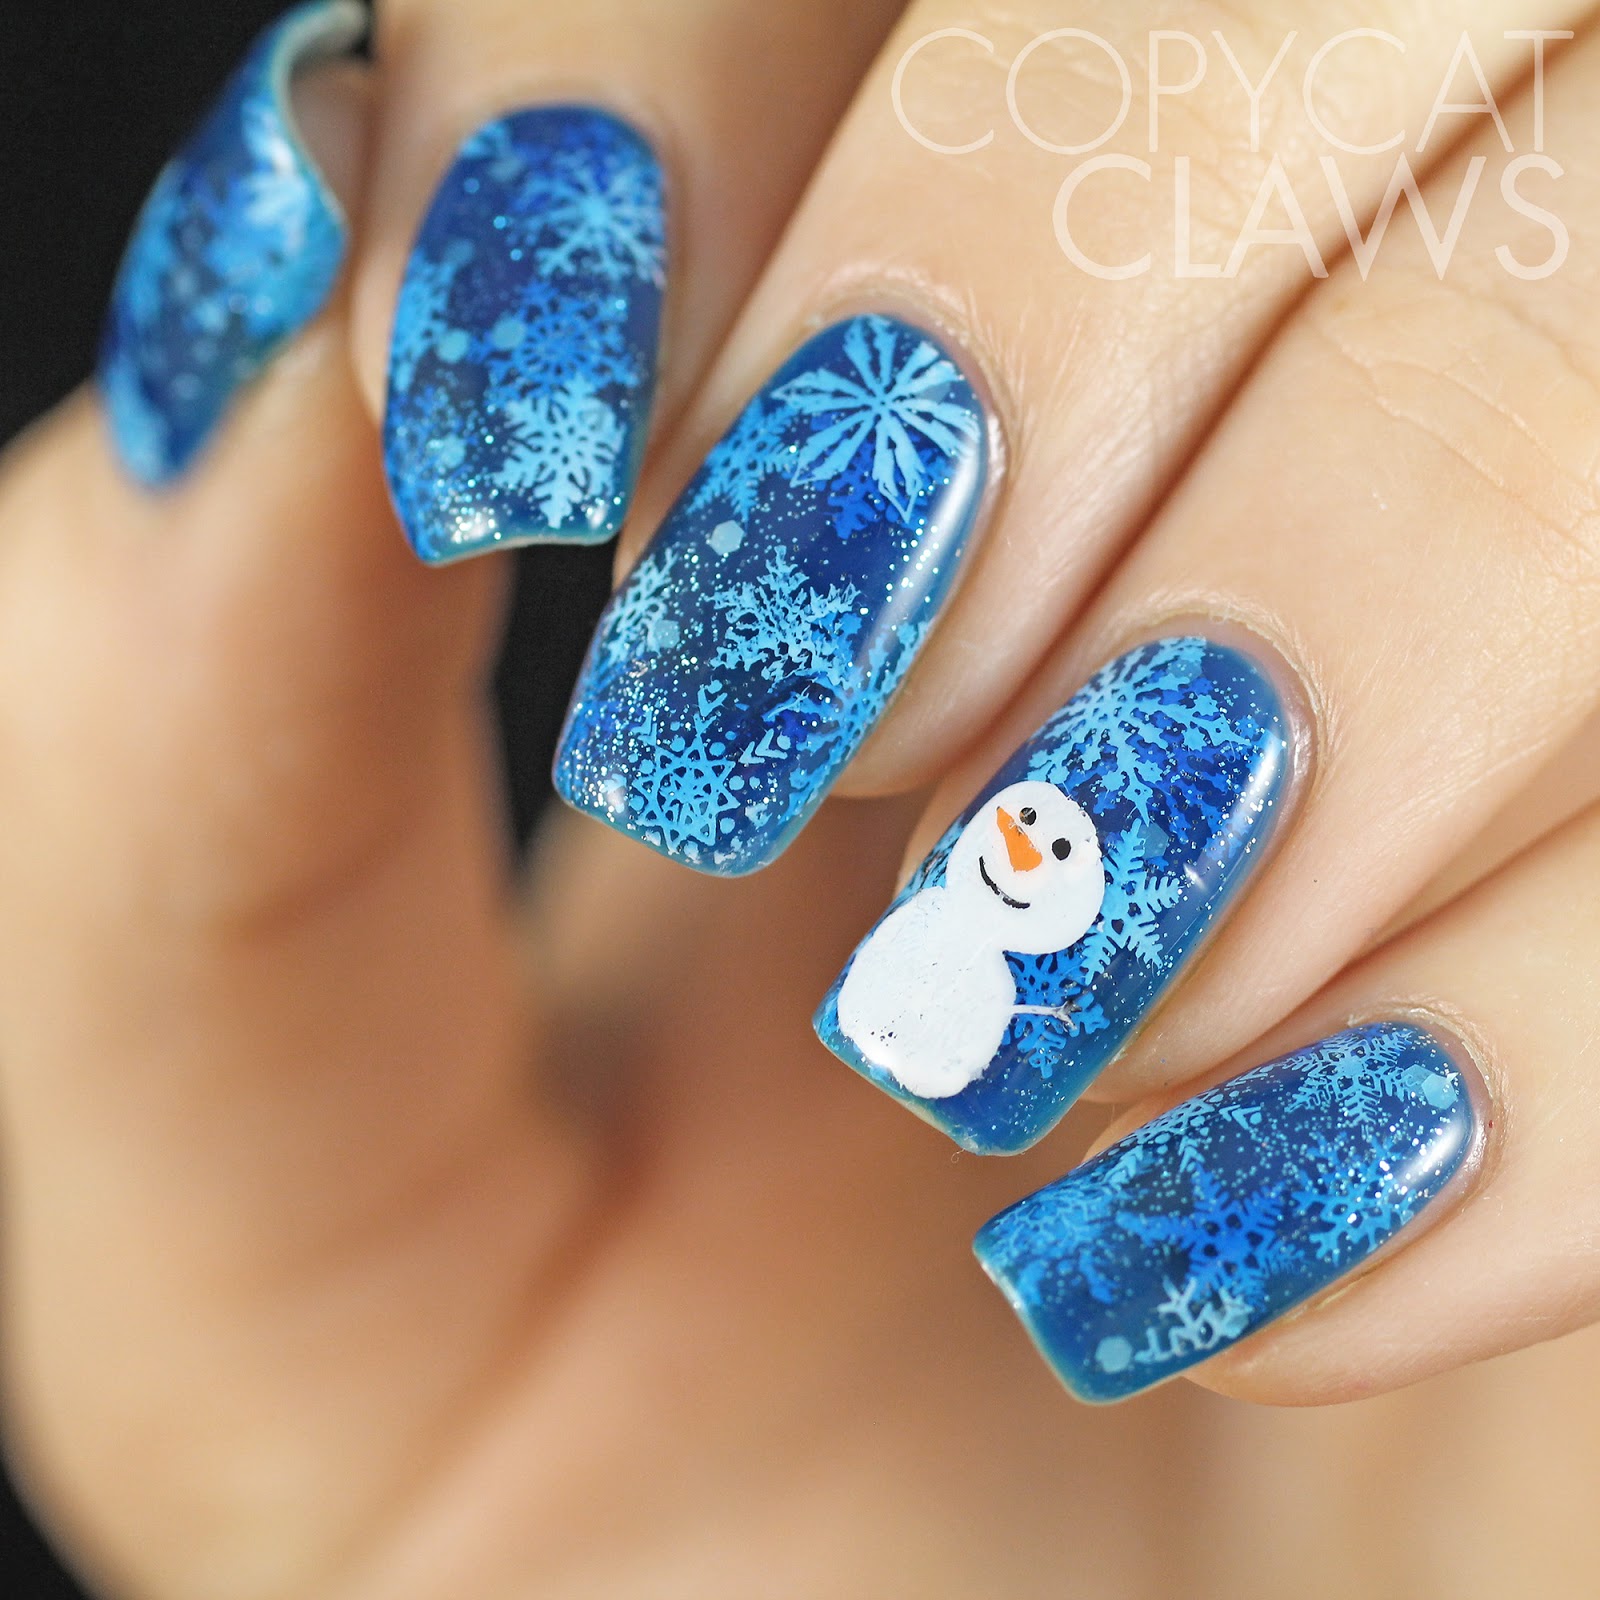 Copycat Claws: Sunday Stamping - Winter Memories